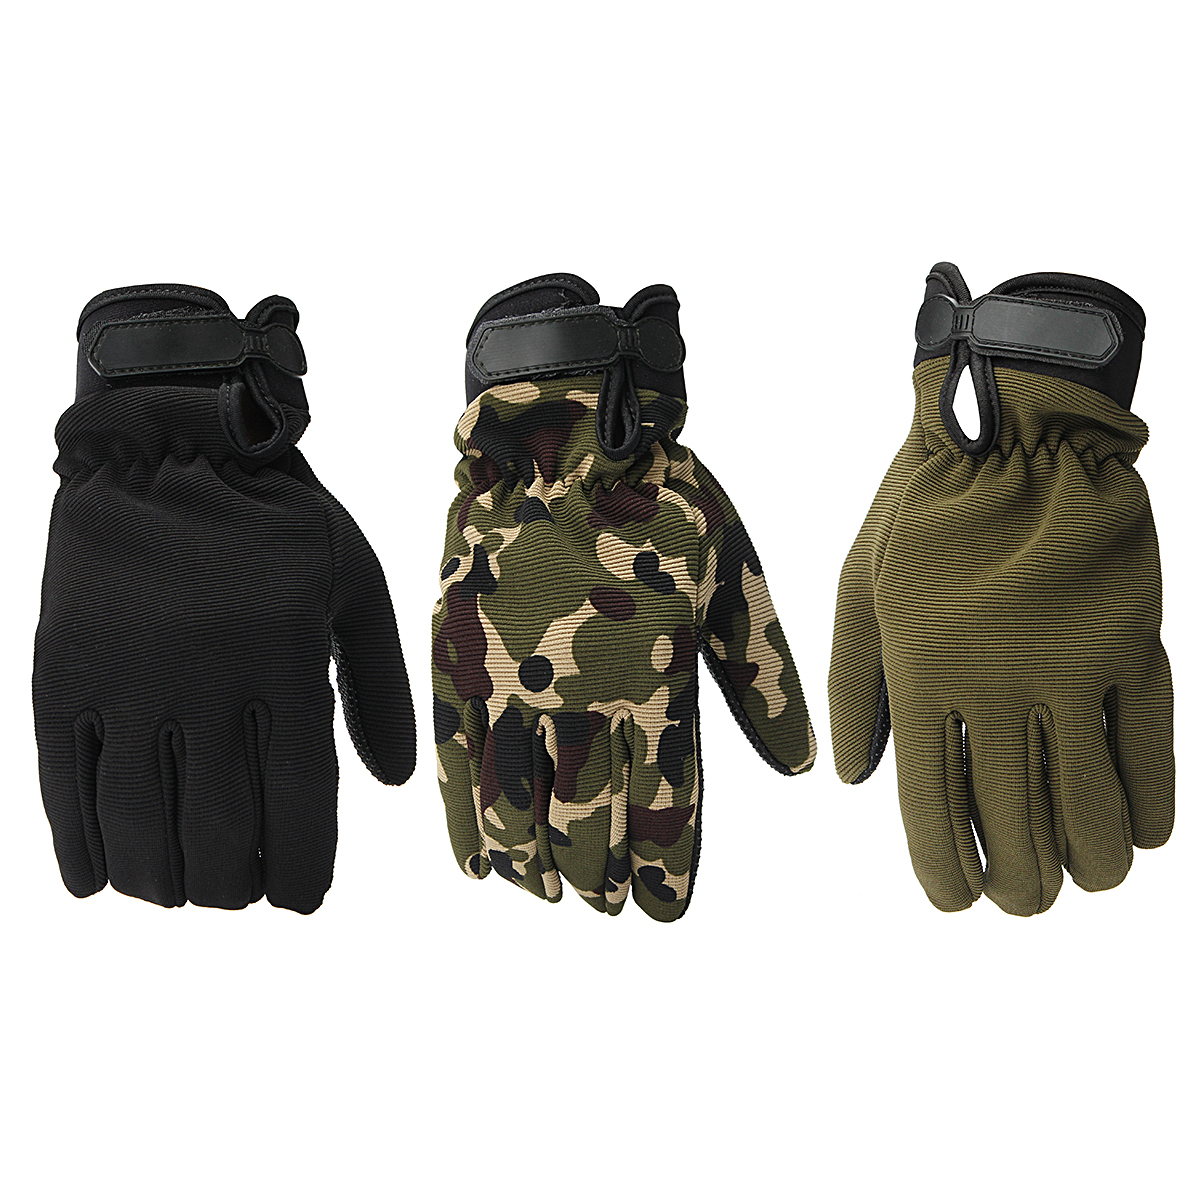 Military-CS-Tactical-Airsoft-Shooting-Hunting-Riding-Sports-Exercise-Full-Finger-Gloves-980429